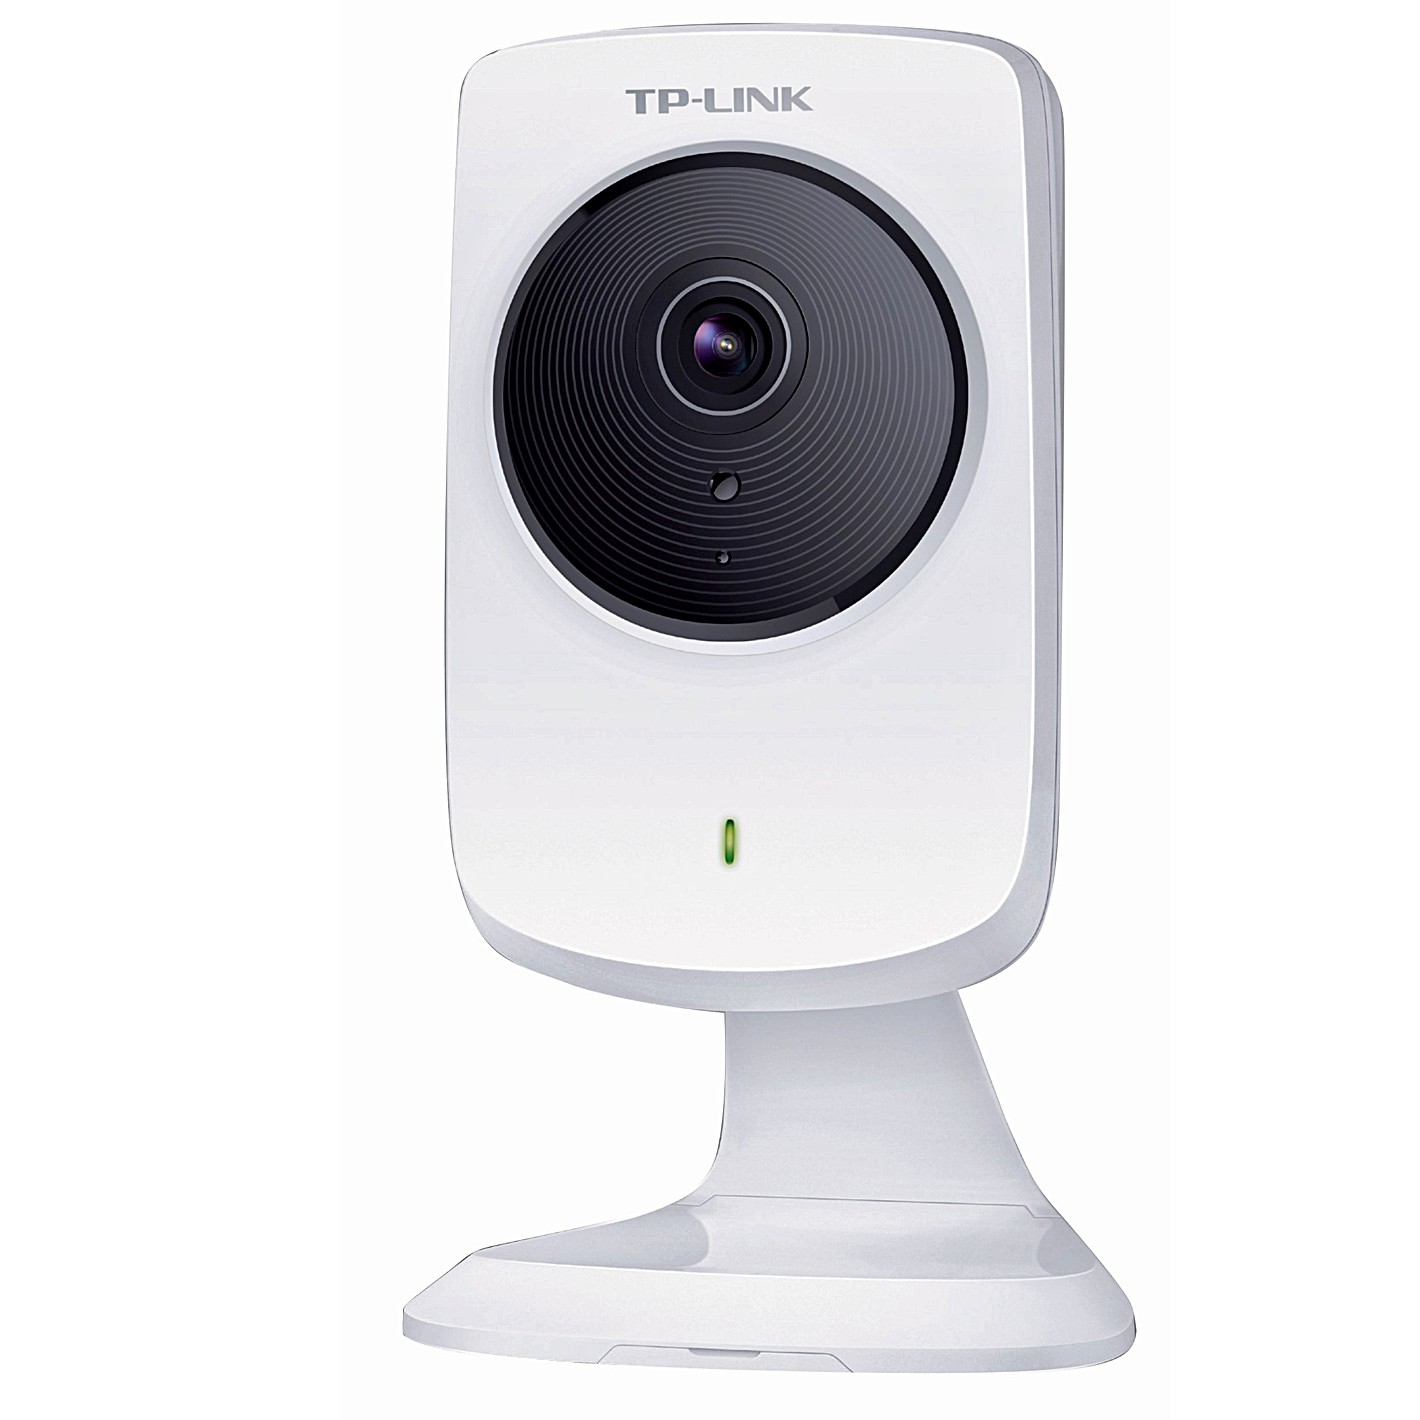 IP-Cam TP-Link NC220 Telecamera Cloud Notte/Giorno Wi-Fi a 300Mbps